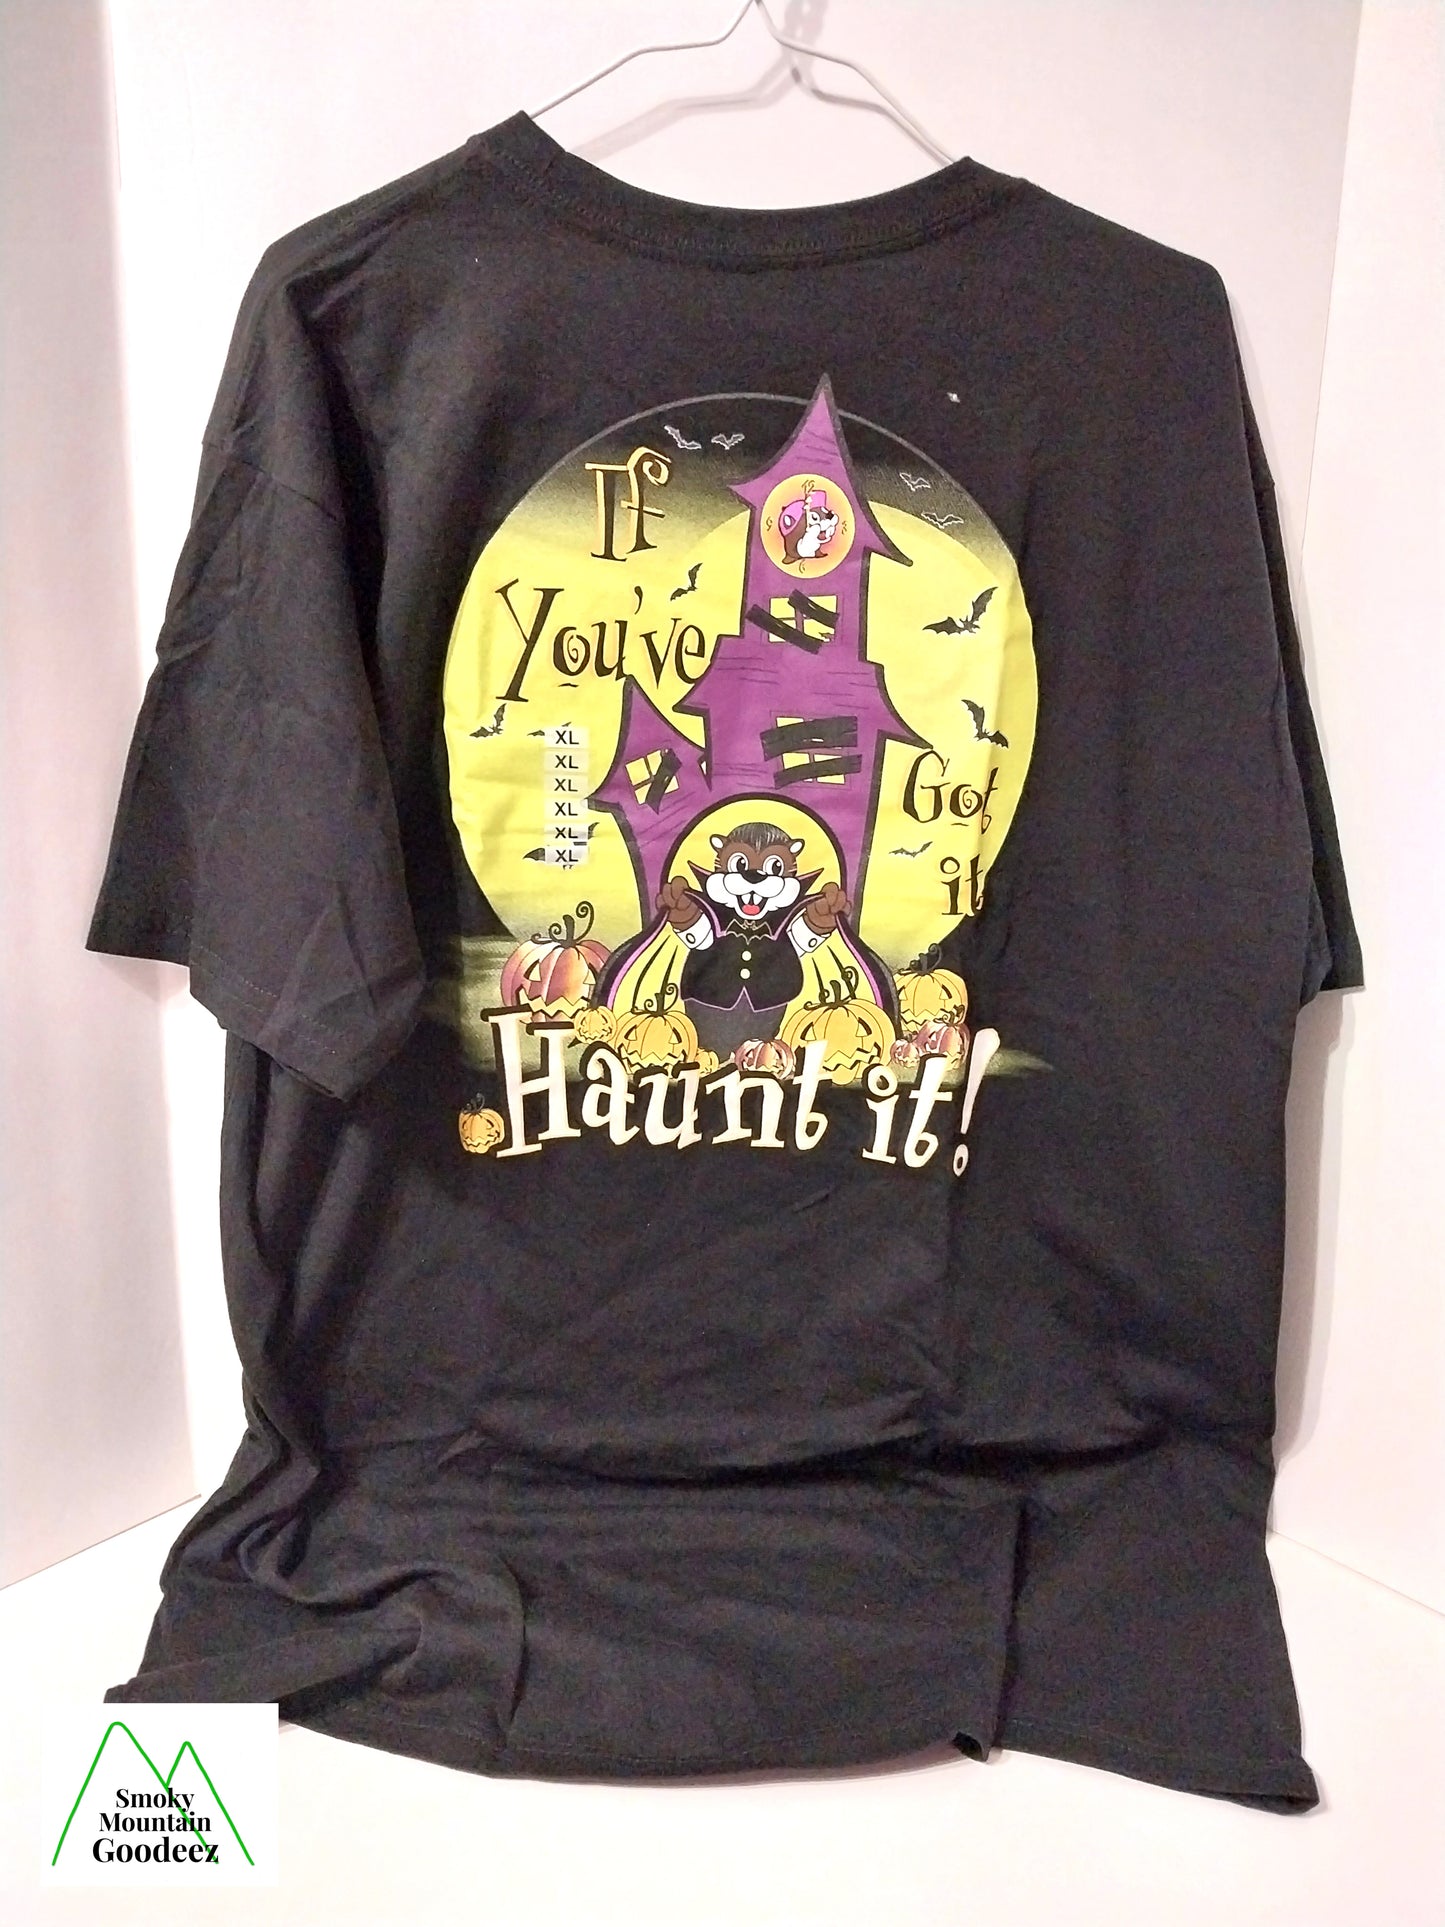 Buc-ee's Limited Edition Halloween "If You Got It, Haunt It" T-shirt